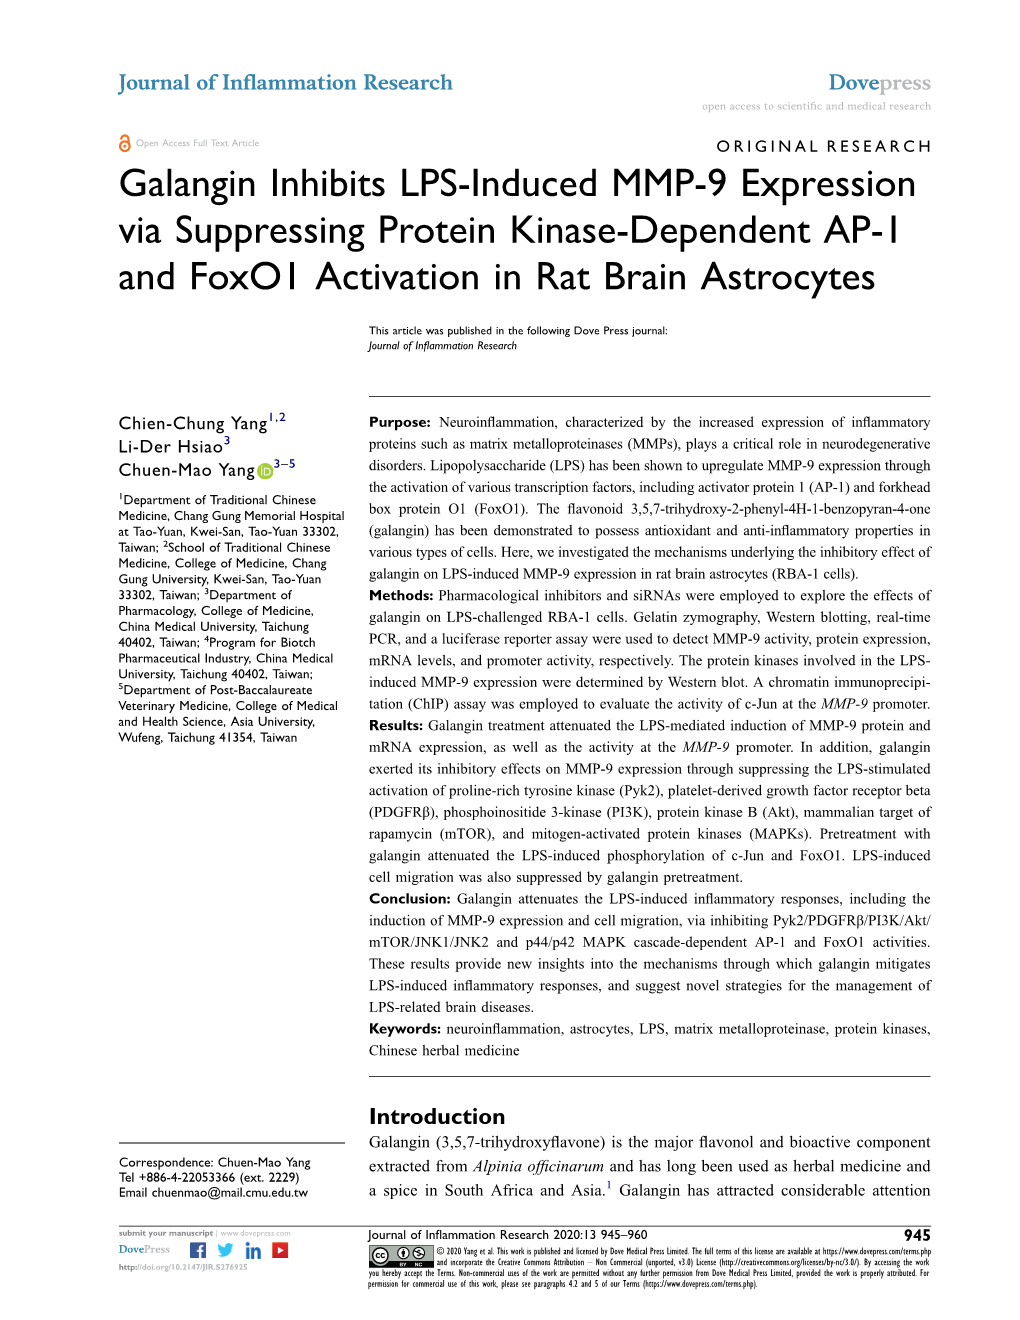 Galangin Inhibits LPS-Induced MMP-9 Expression Via Suppressing Protein Kinase-Dependent AP-1 and Foxo1 Activation in Rat Brain Astrocytes